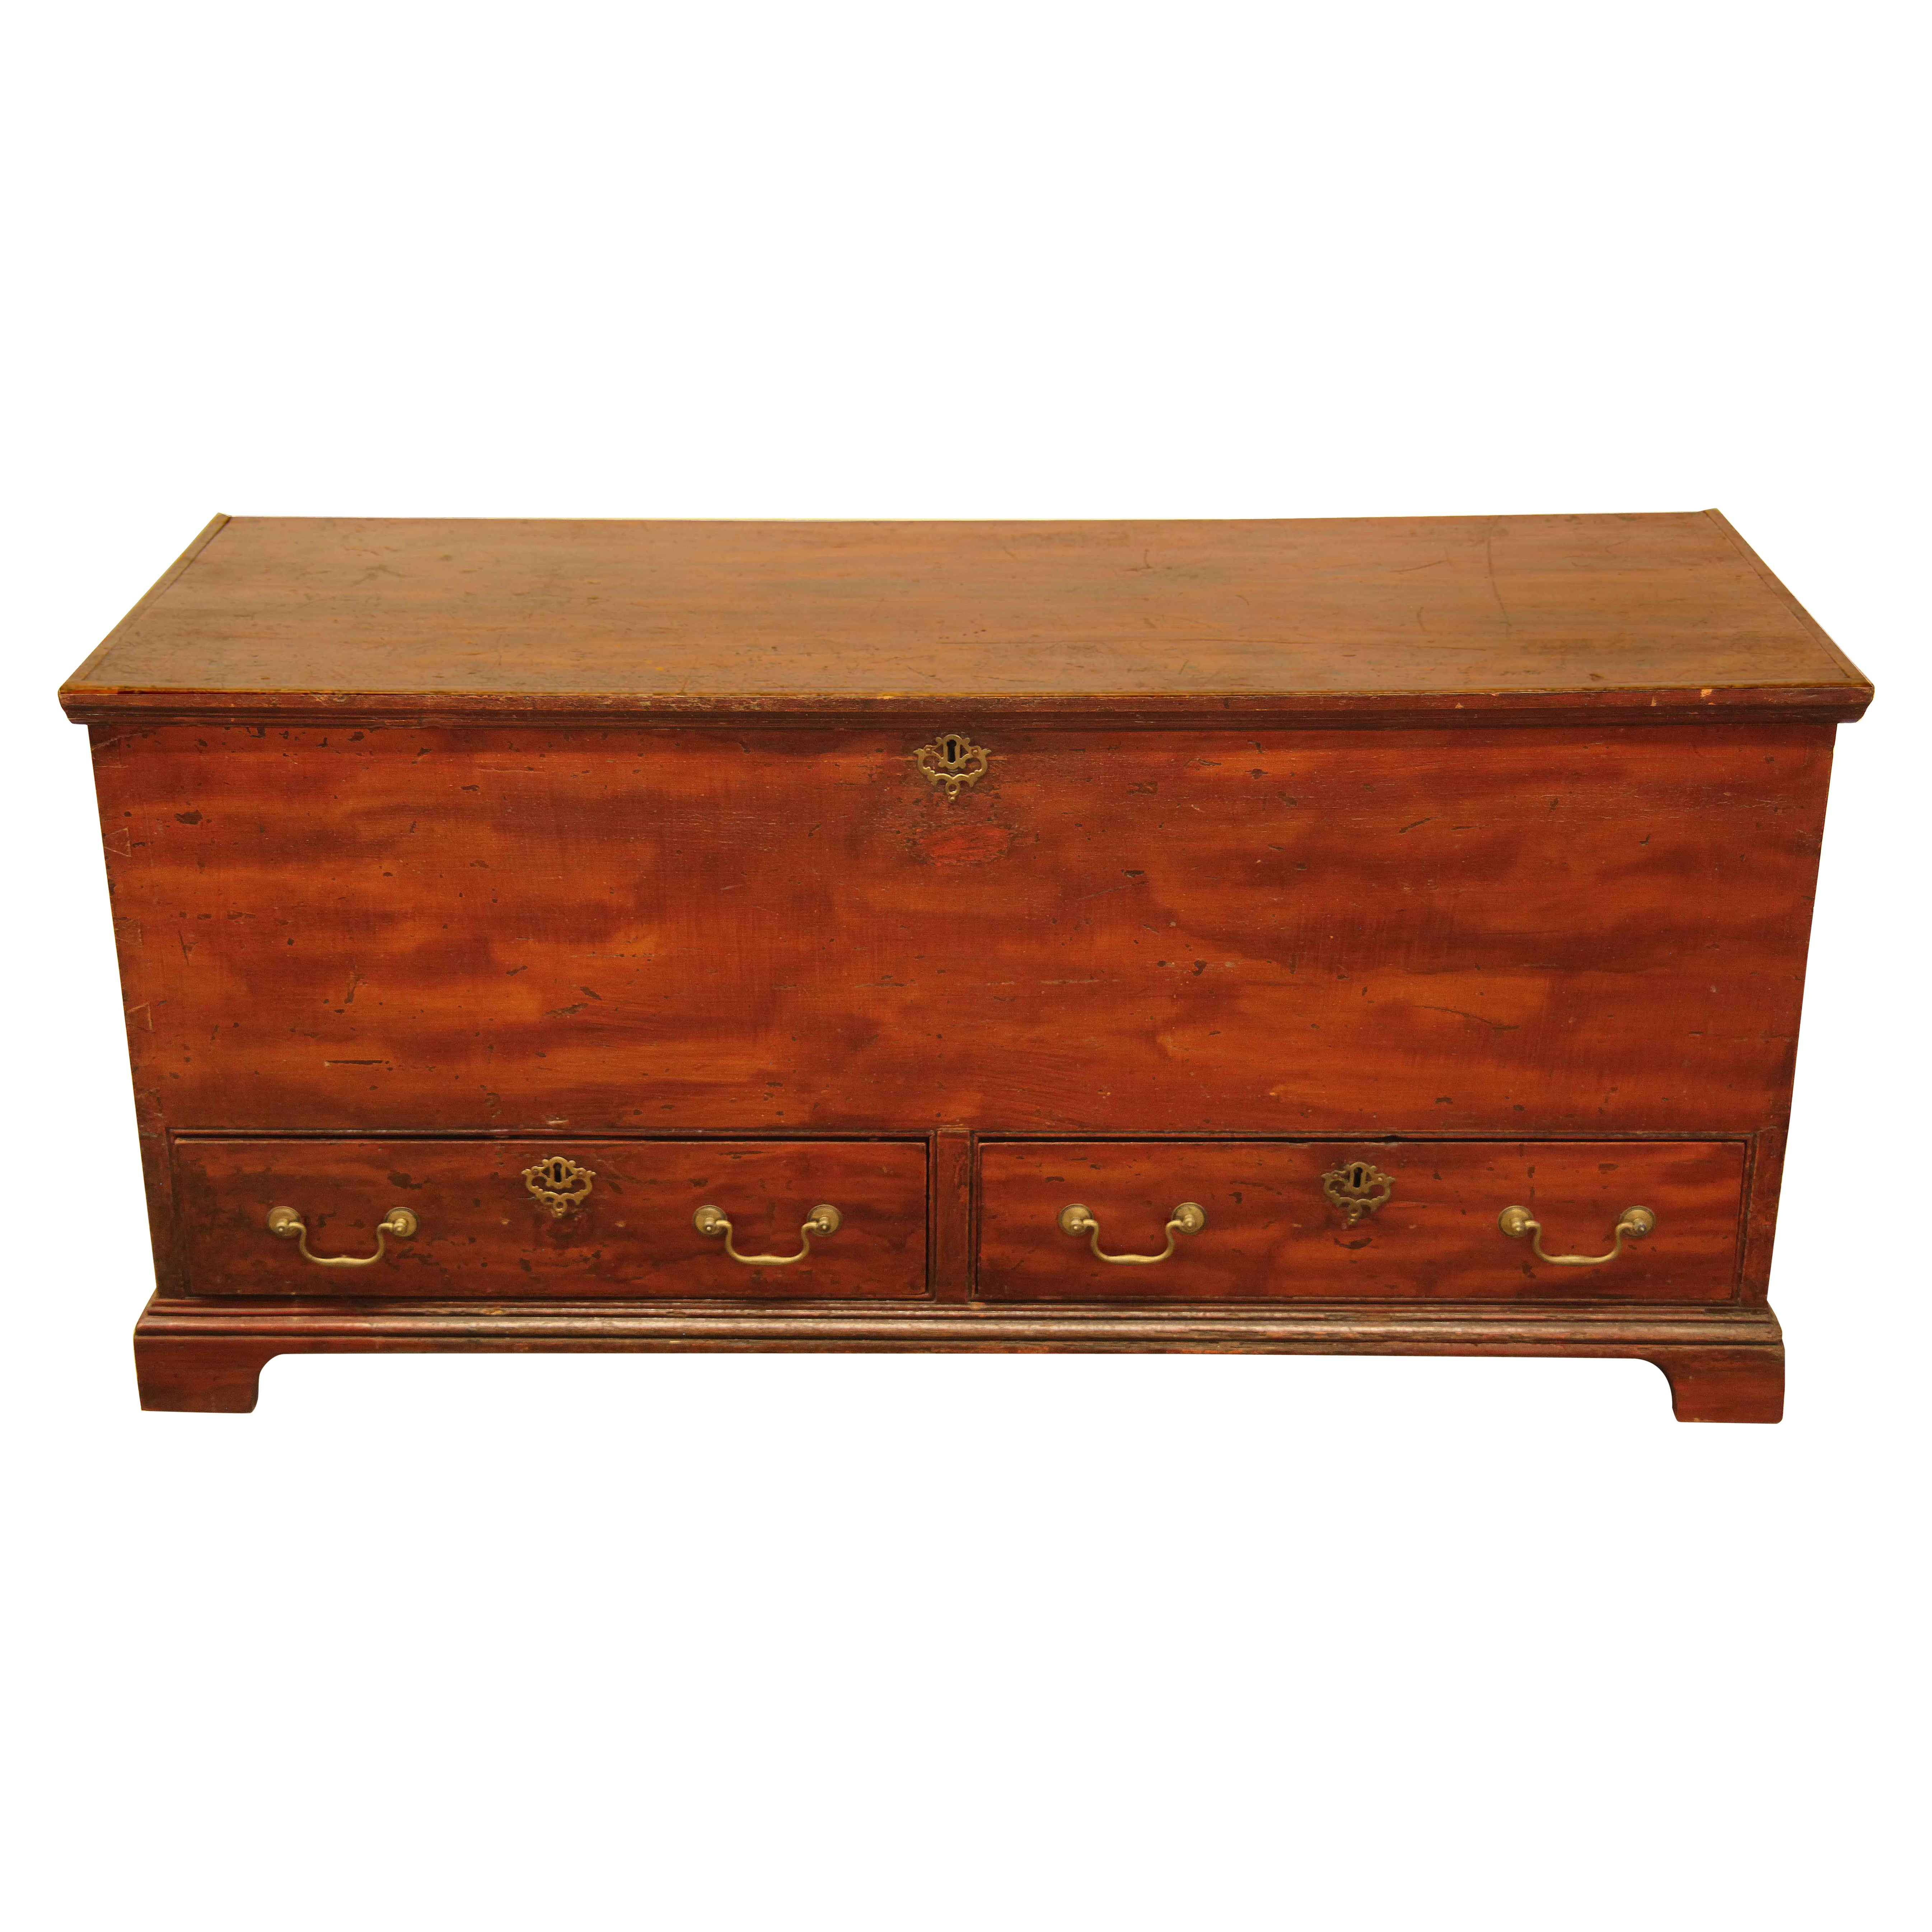 English Grain Painted Blanket Chest For Sale